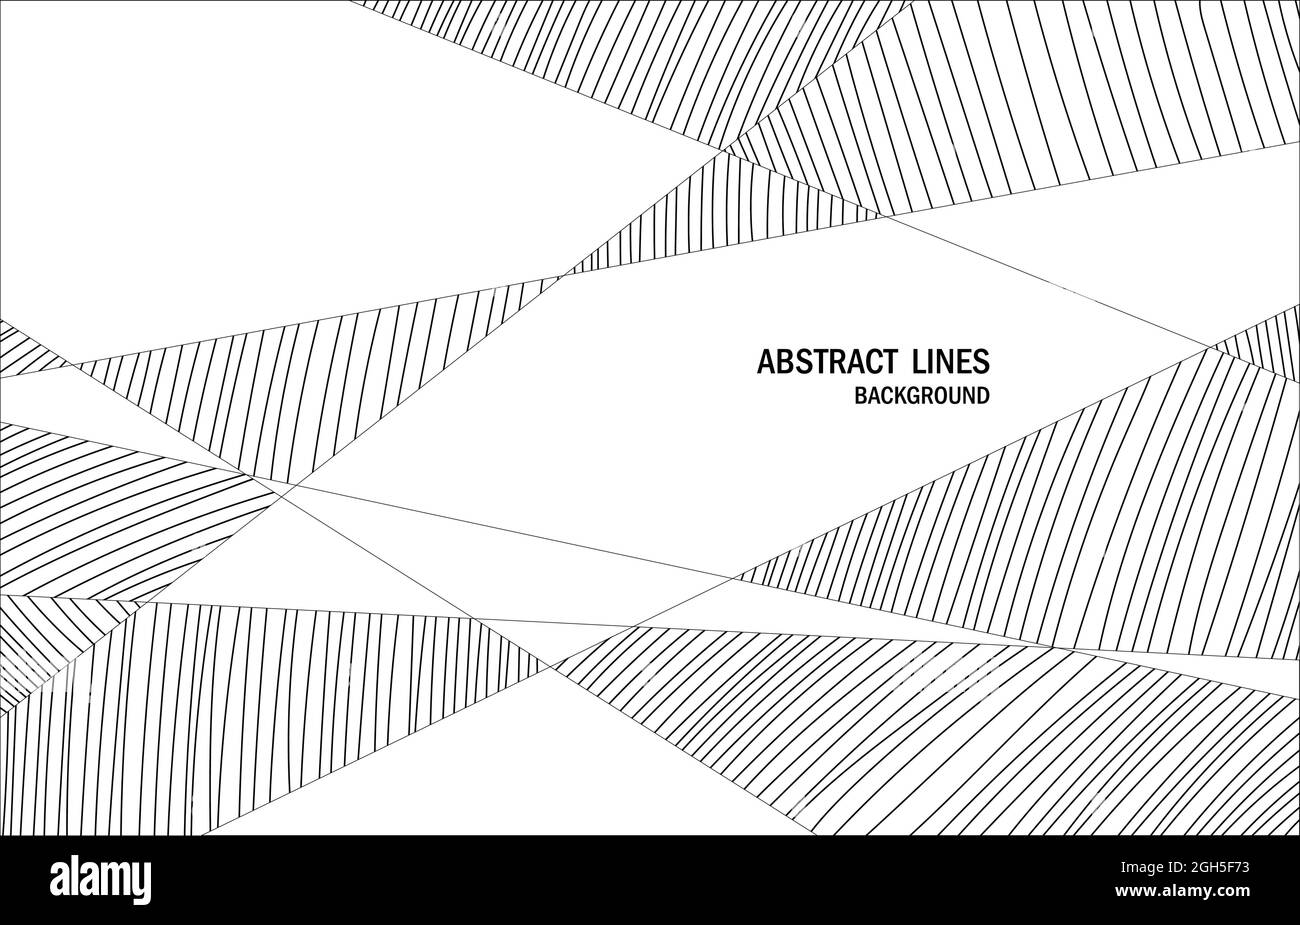 Abstract lines shape style artwork with space of texture. Decorative for ad, poster, header text background. Illustration Stock Vector